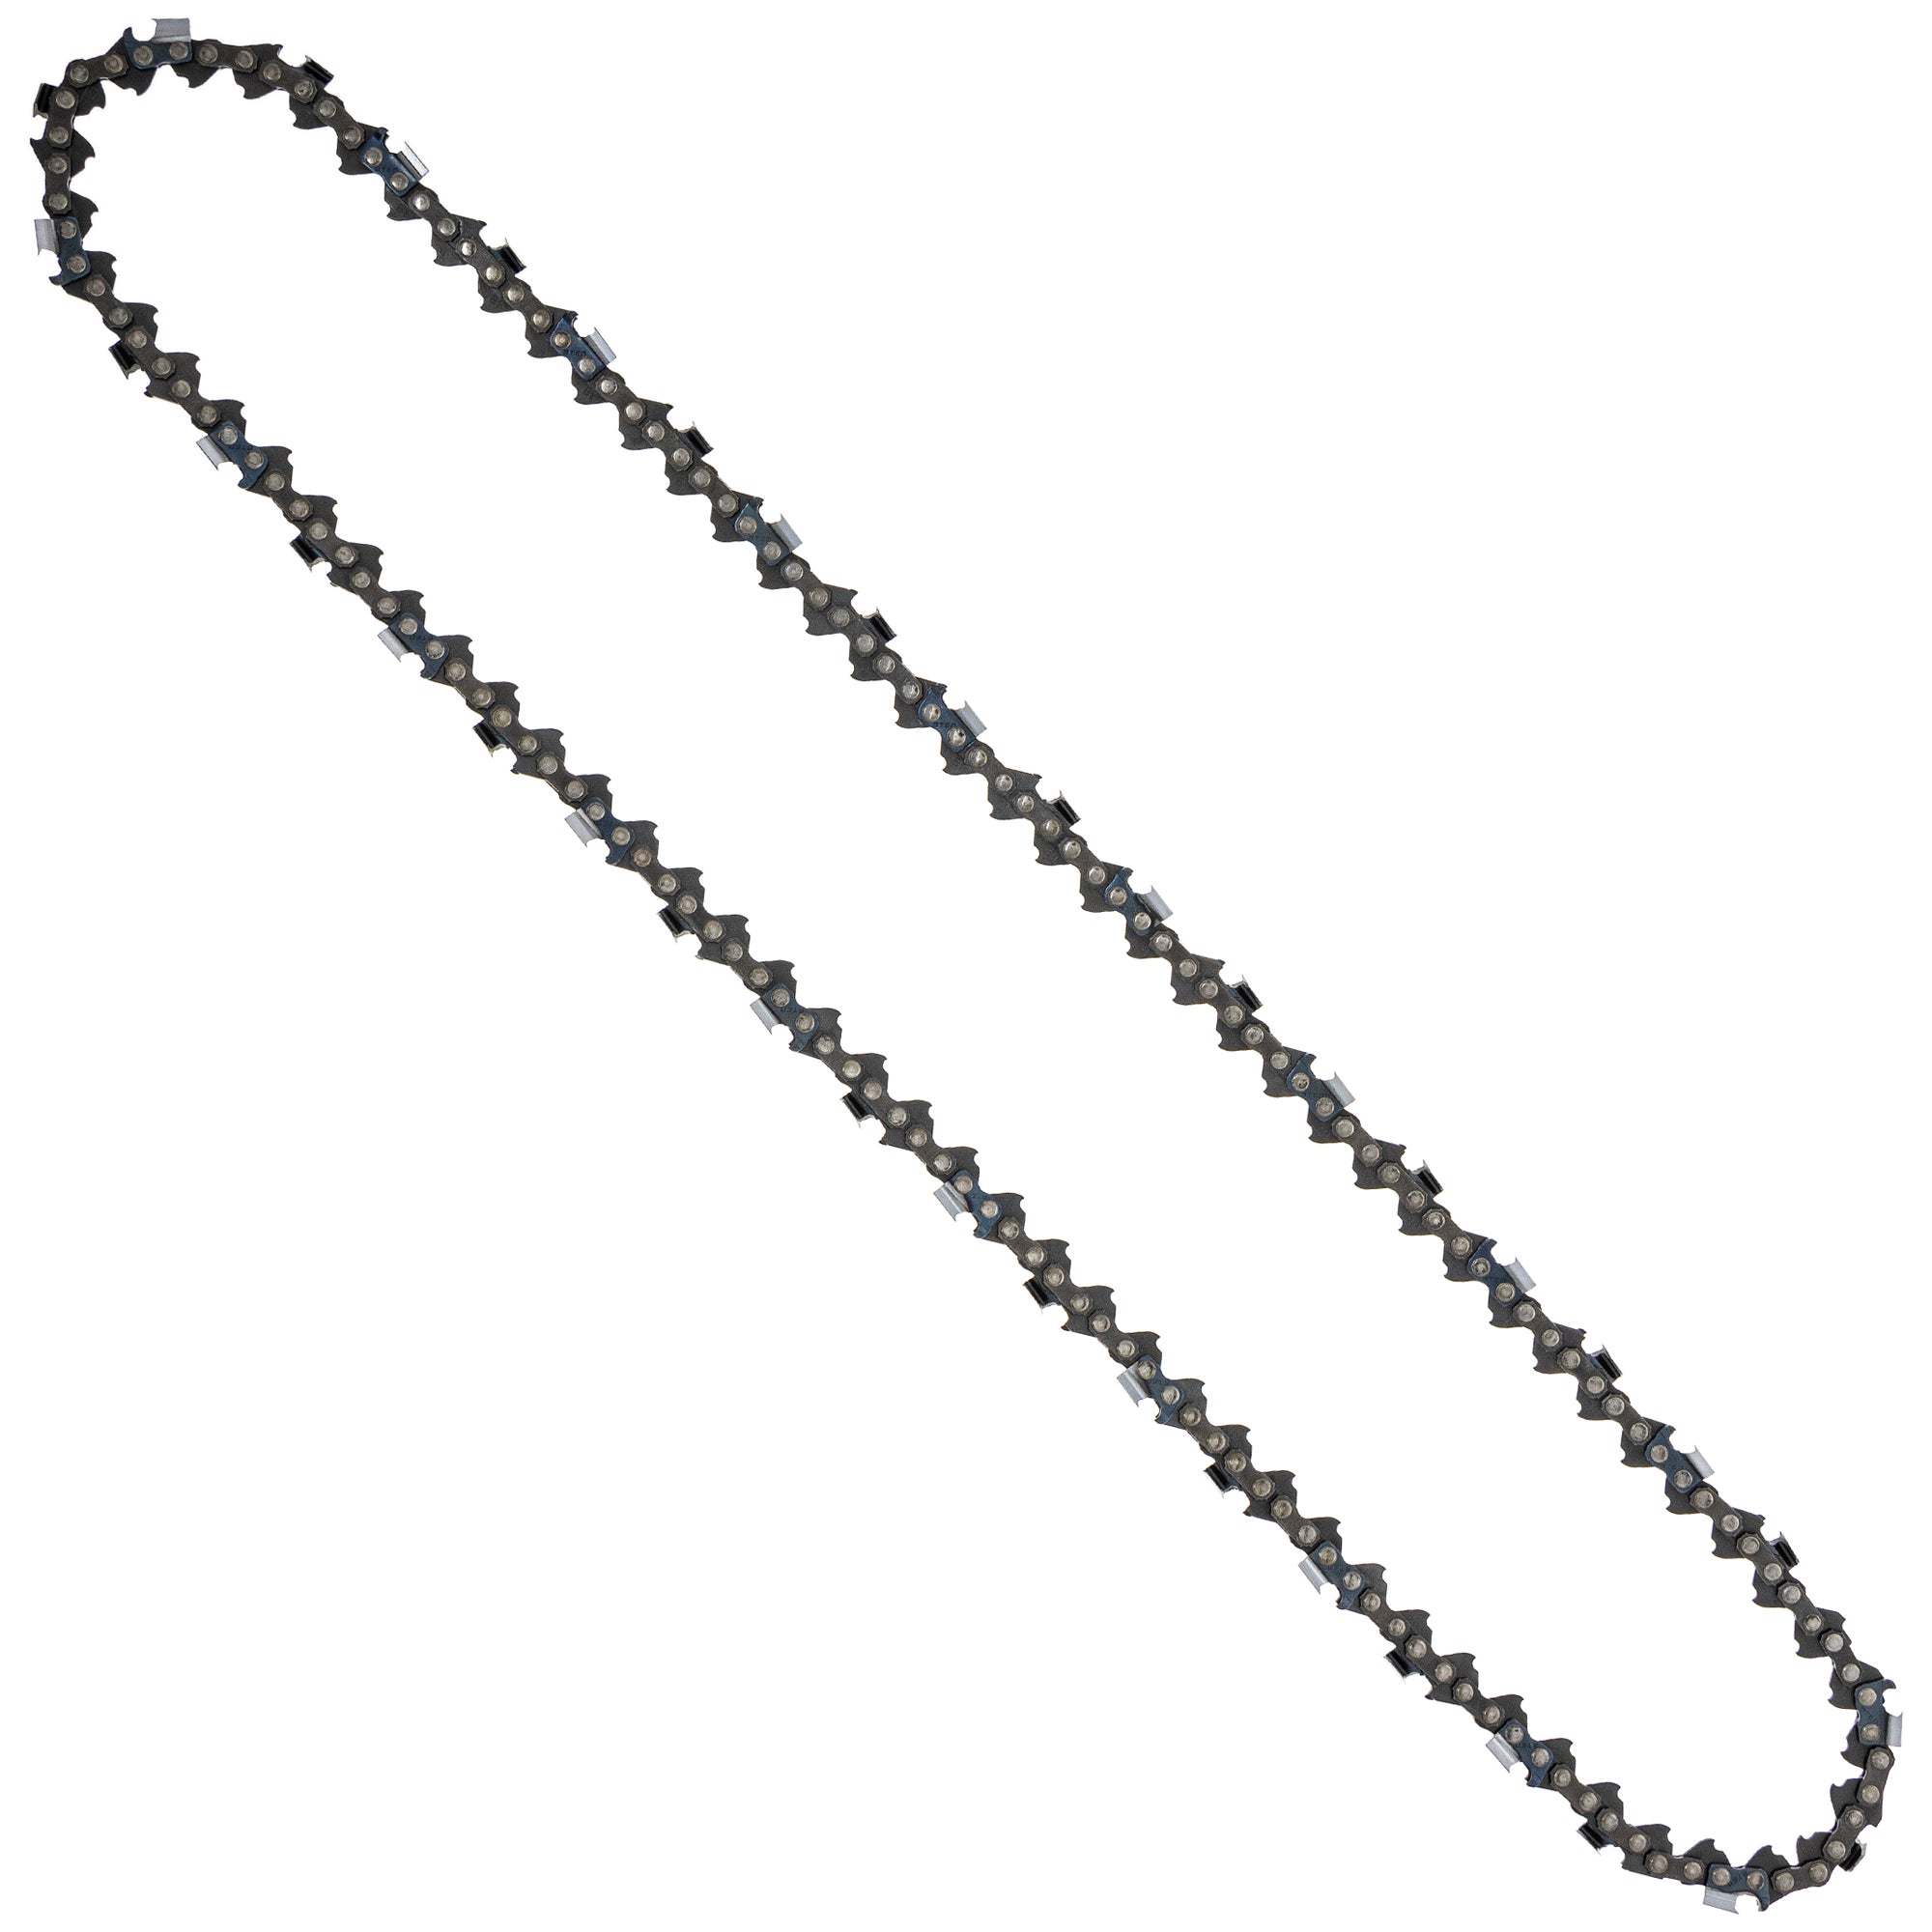 8TEN 810-CCC2310H Chain 2-Pack for zOTHER Oregon MS 634 30 040